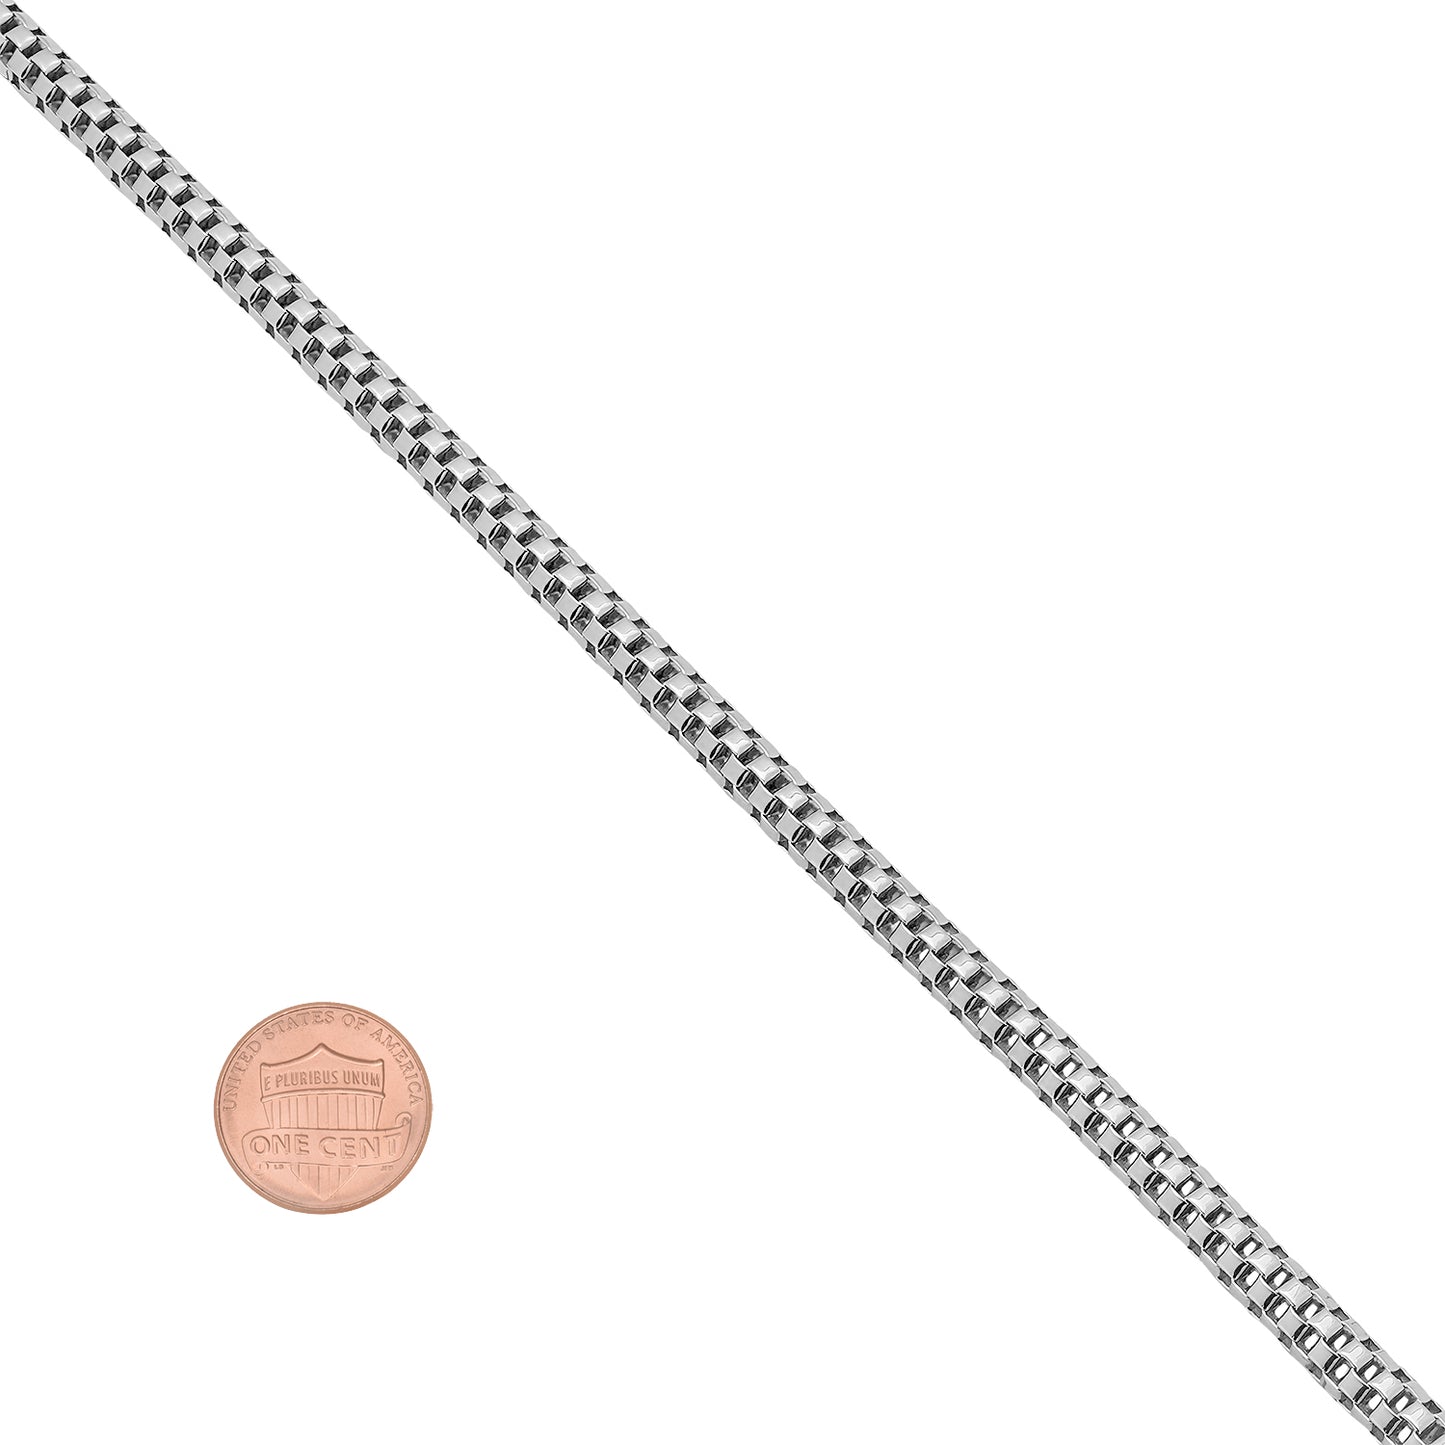 4mm High-Polished 0.16 mils (4 microns) Rhodium Brass Square Box Chain Necklace, 20'-40' + Jewelry Cloth & Pouch (SKU: NEC460)